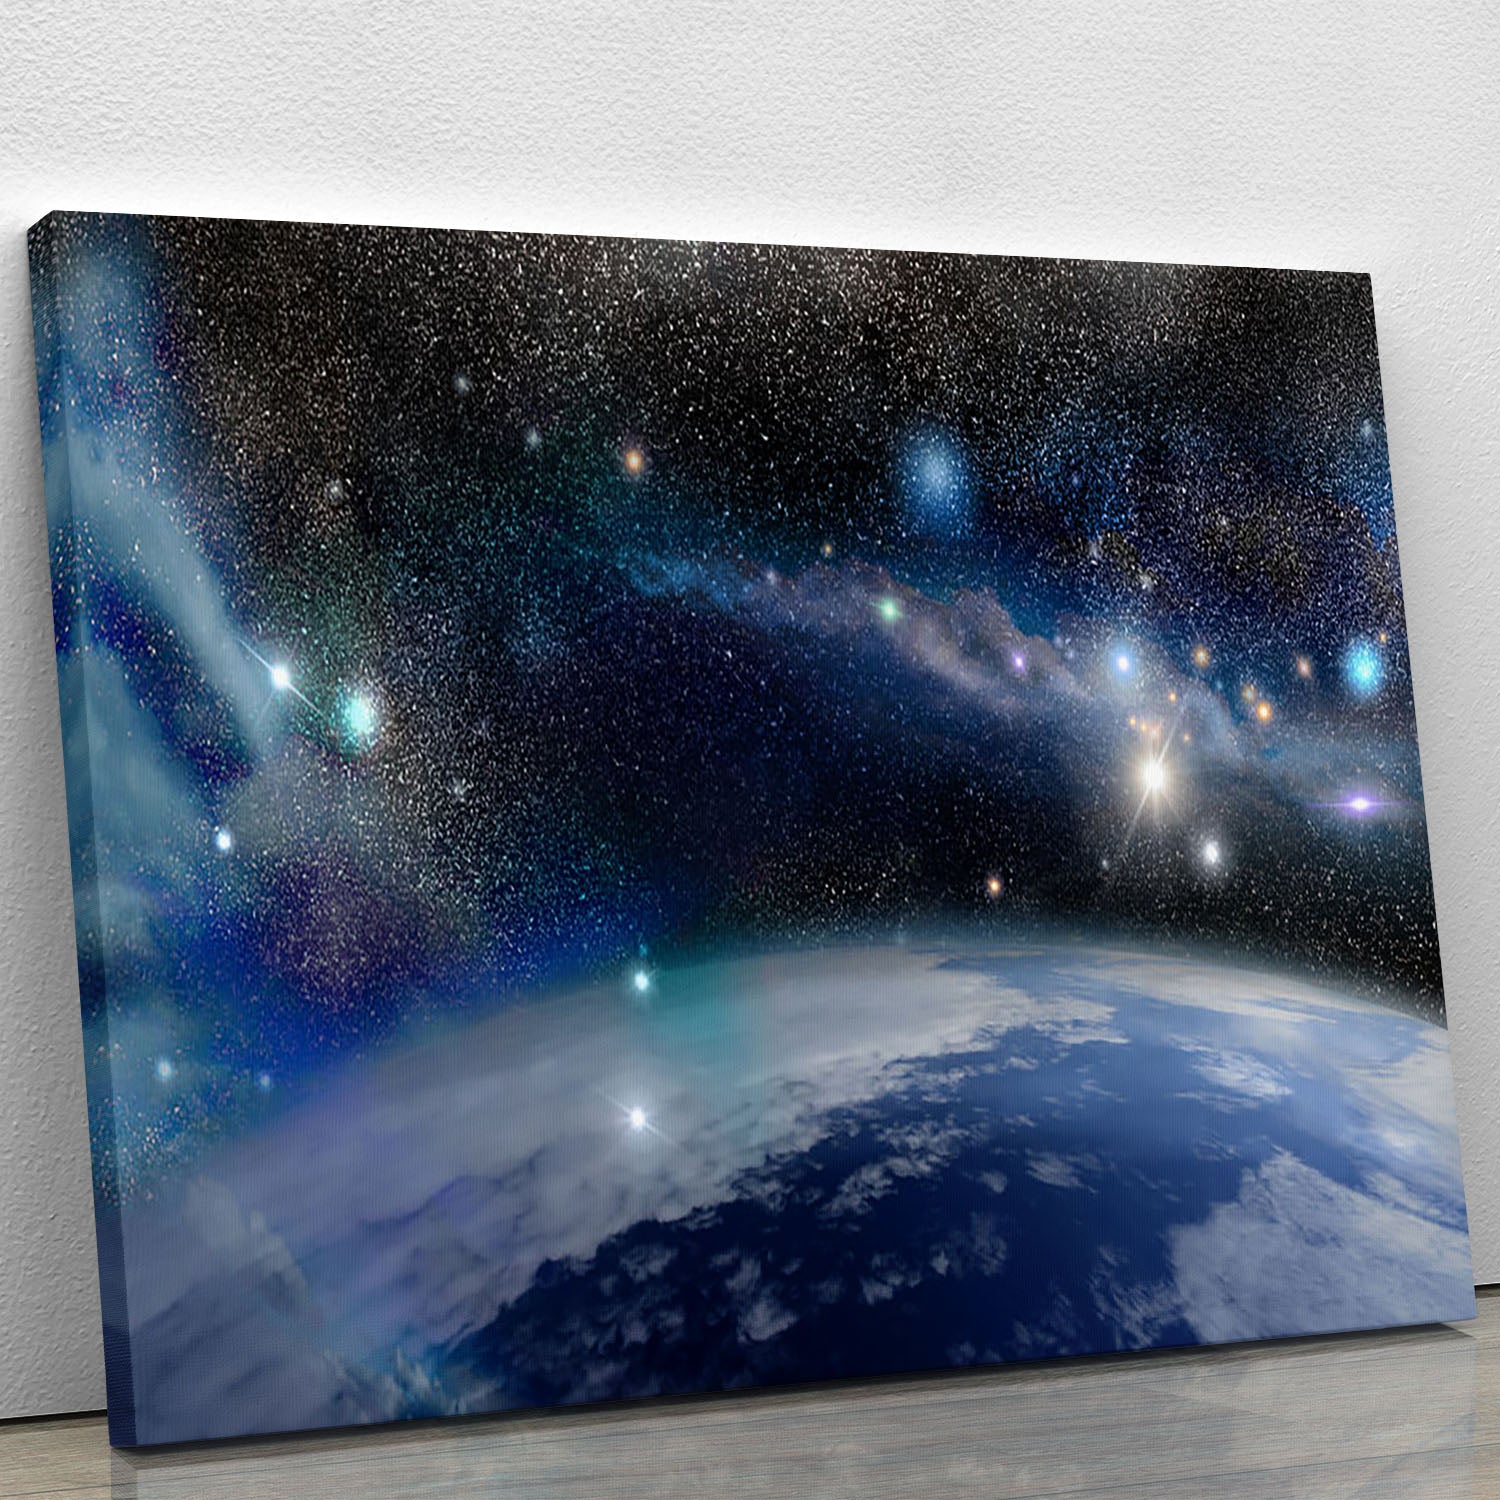 Earth in a Cosmic Cloud Canvas Print or Poster - Canvas Art Rocks - 1